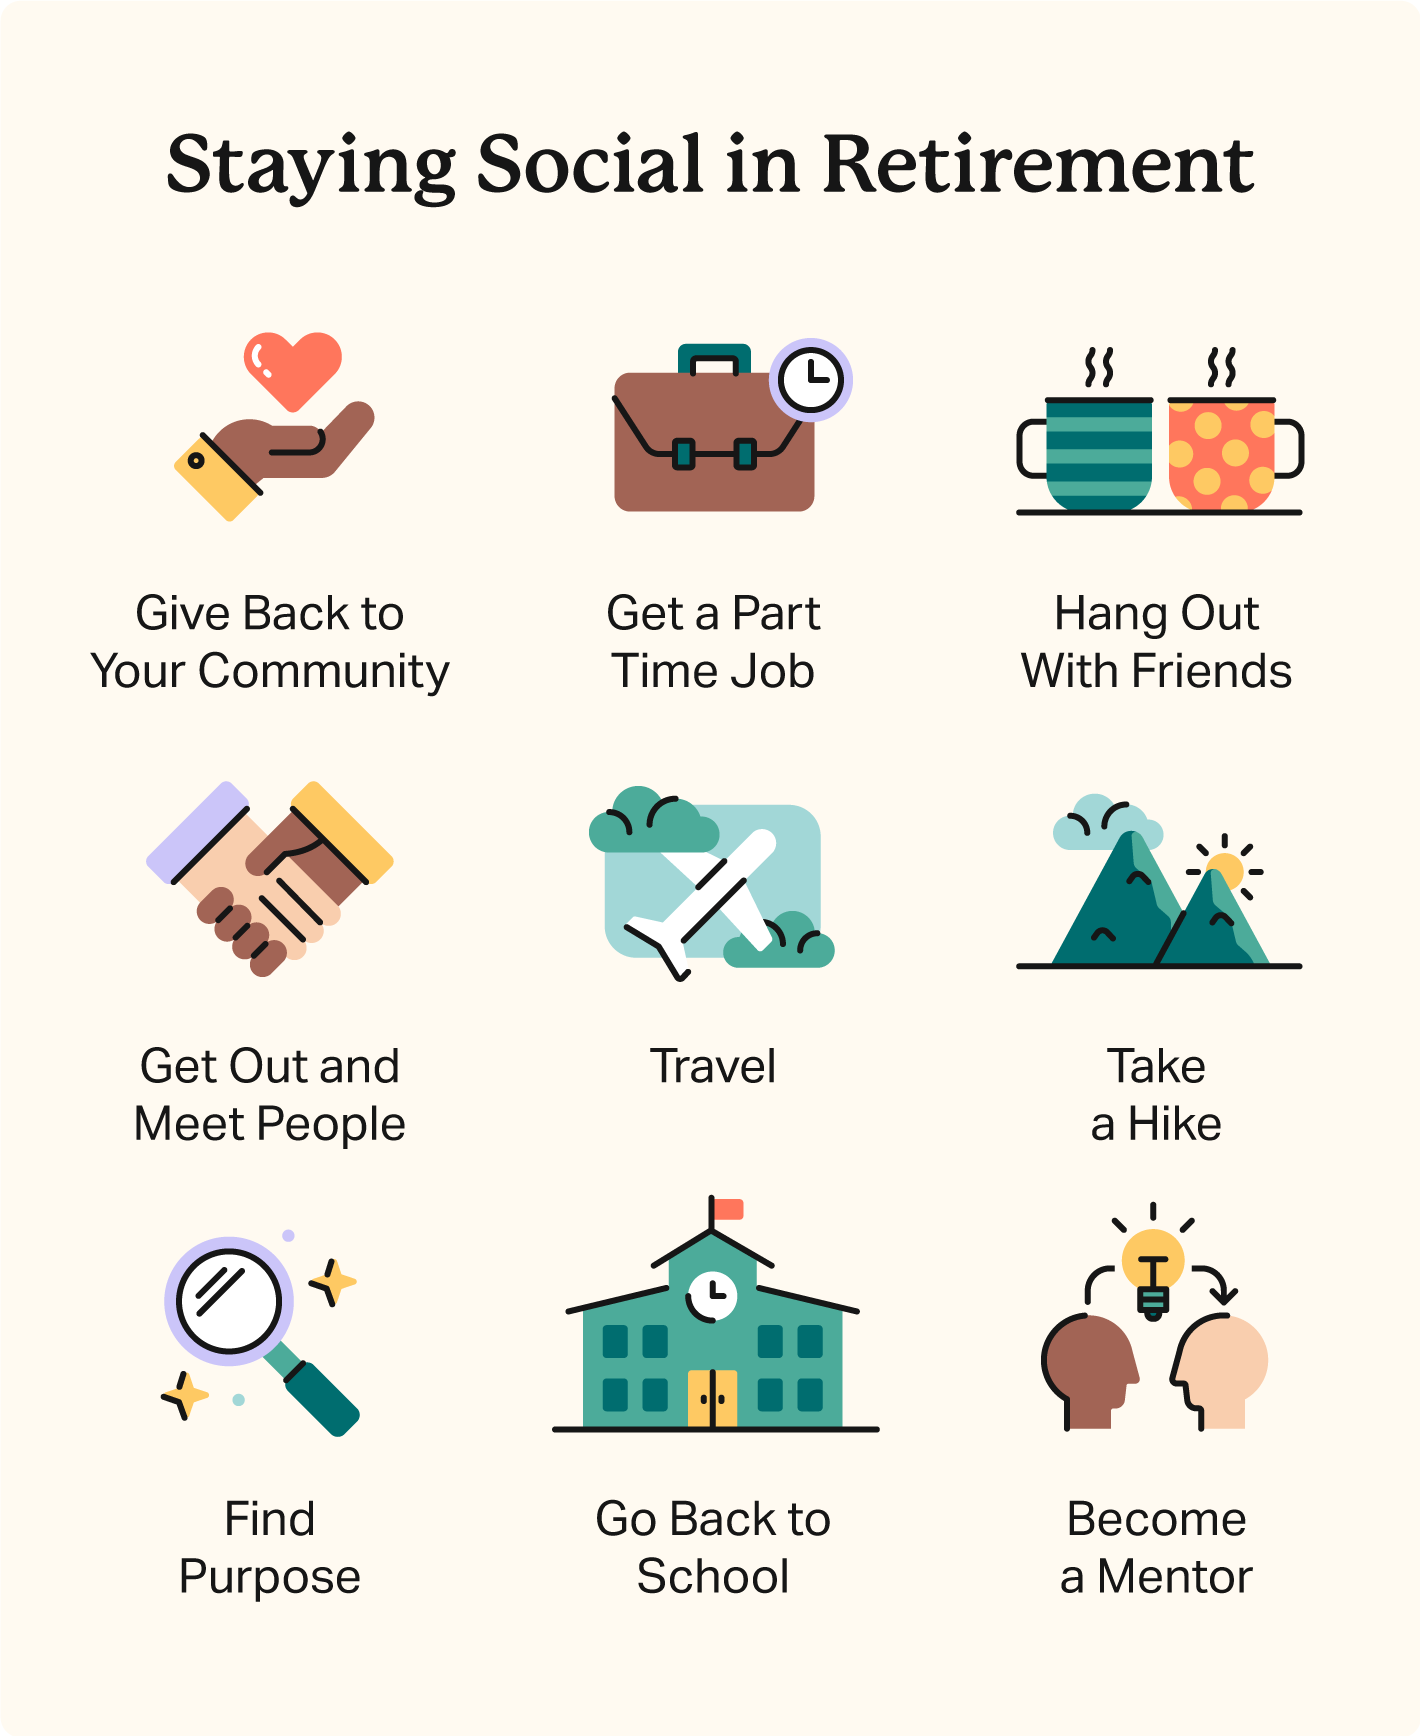 9 illustrated icons represent ways to socialize in retirement, including community work and mentorship.